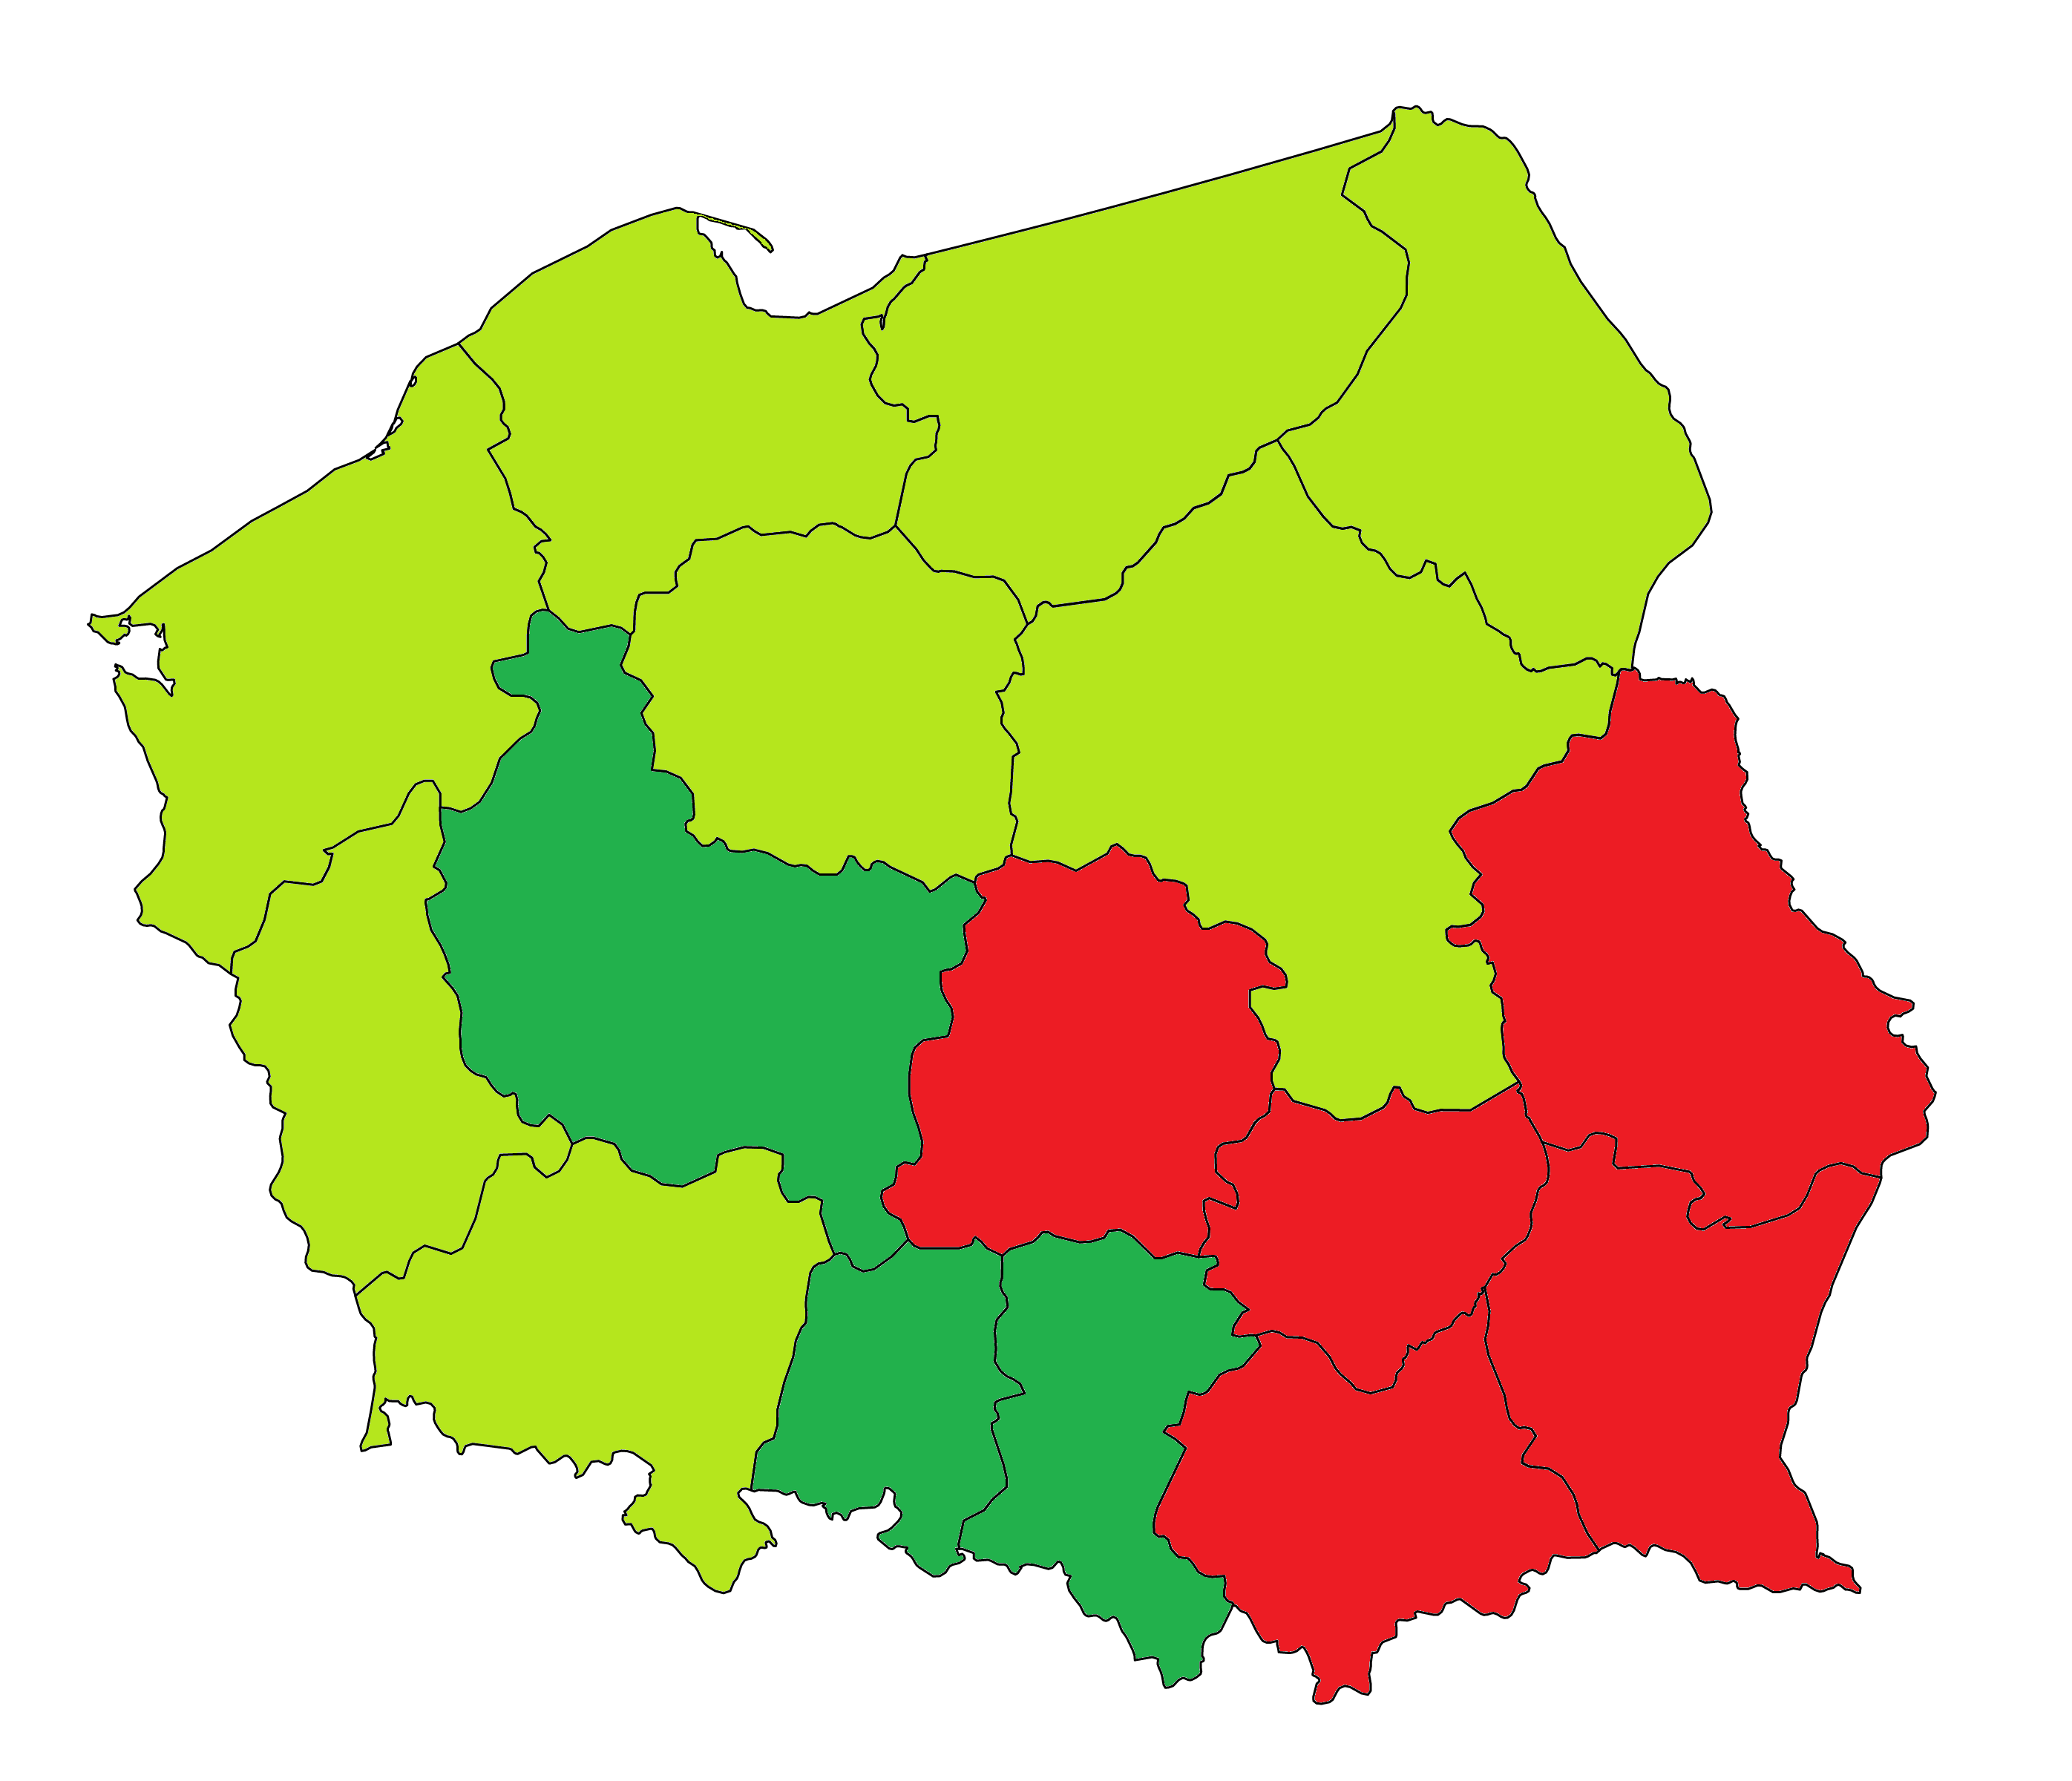 File:LGBT Free Zones Poland 2020 - Voivodeships.png - Wikimedia Commons